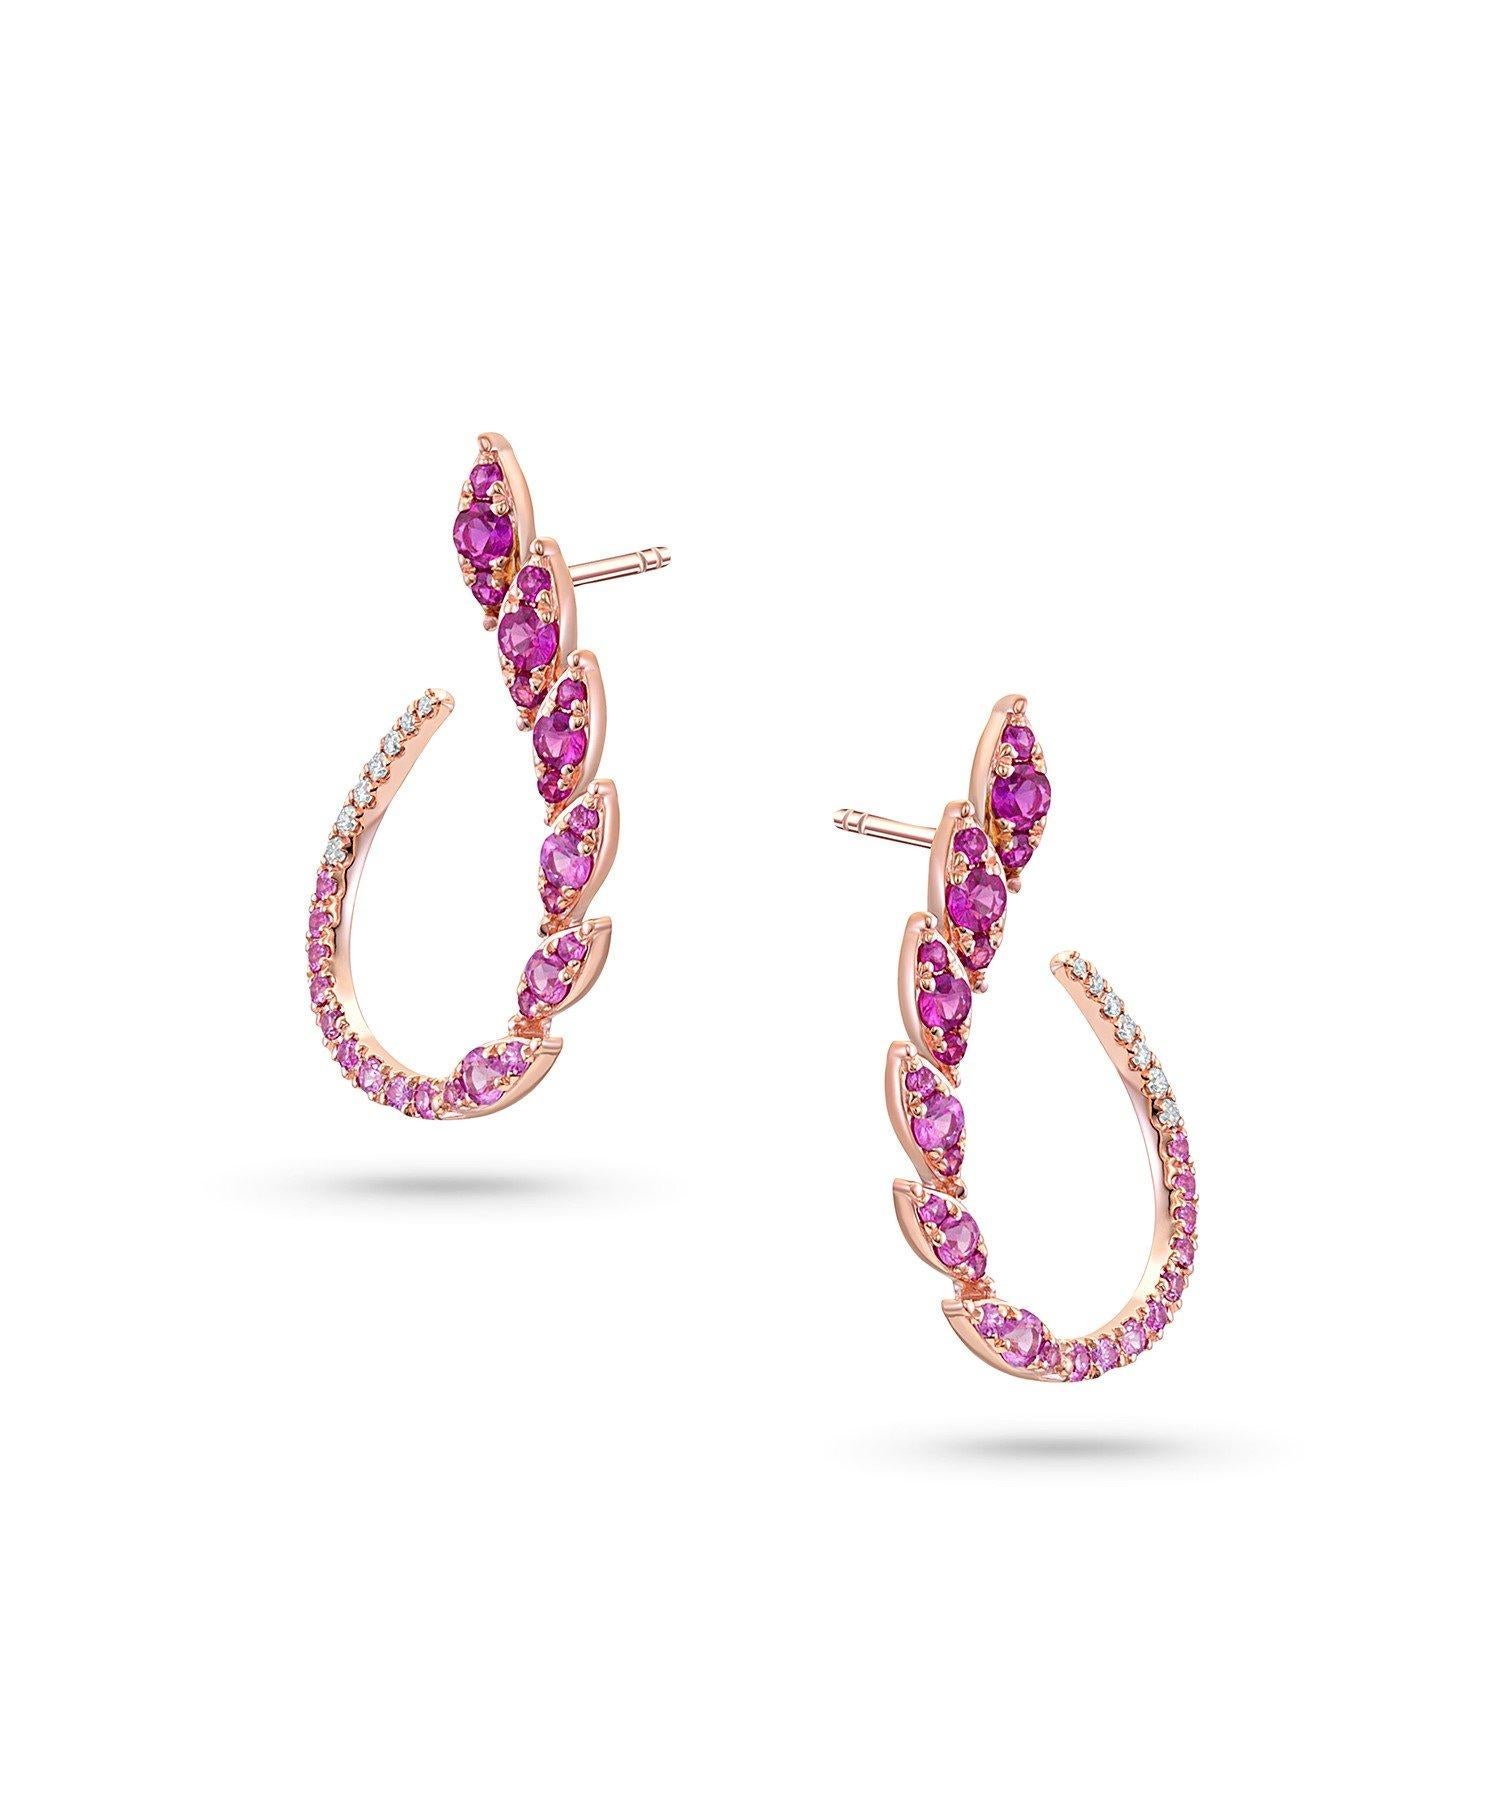 14kt Rose Gold Pink Sapphire Earrings With 1.19ct sapphires, 0.08ct diamonds, H-I Color, I1 Clarity.